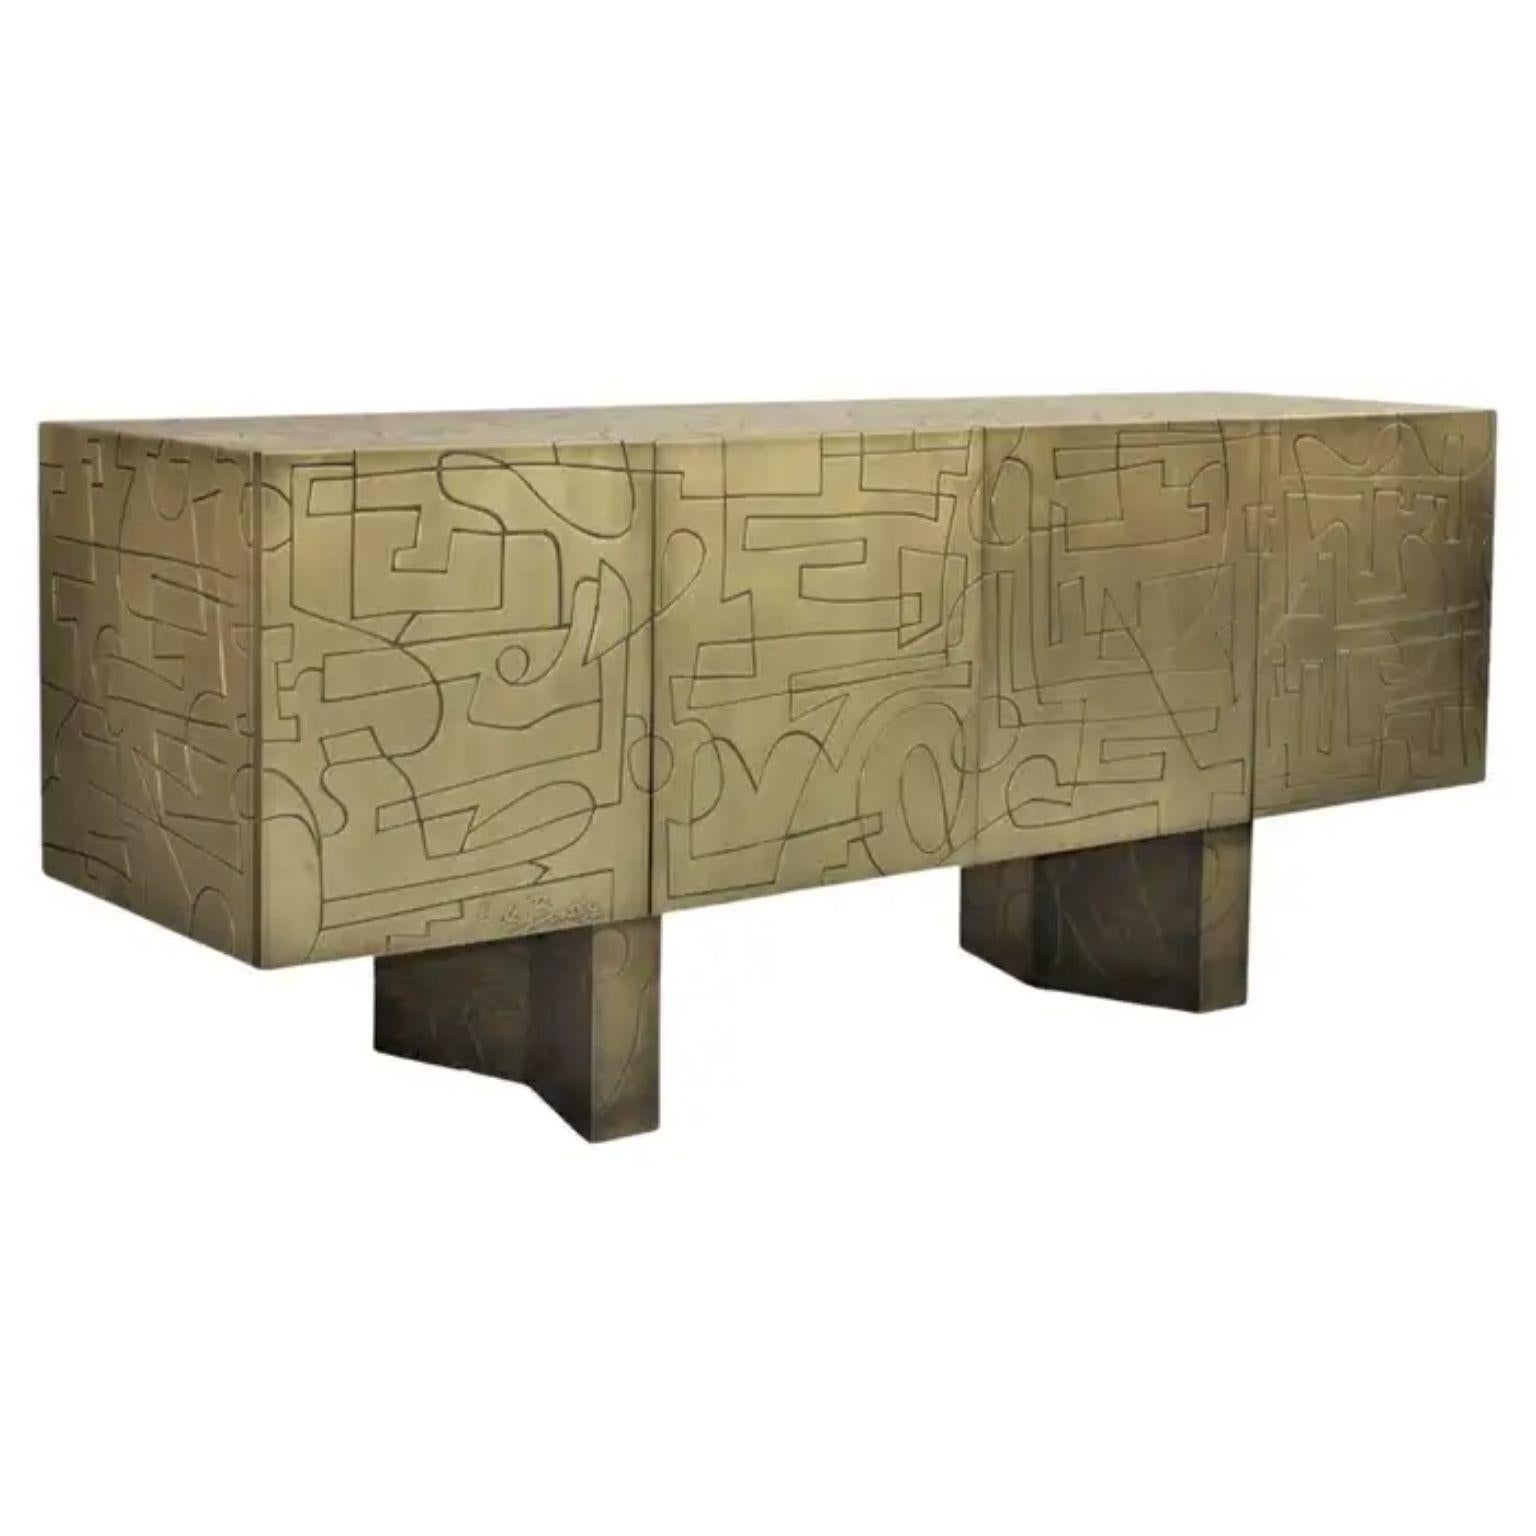 Fully Plated in Acid-Etched Brass 4D Cabinet by Brutalist Be
One Of A Kind.
Dimensions: D 55 x W 200 x H 70 cm.
Materials: Brass.

This exclusive sideboard is hand-made of brass, carefully selected and then shaped by Felix de Boussy to make a